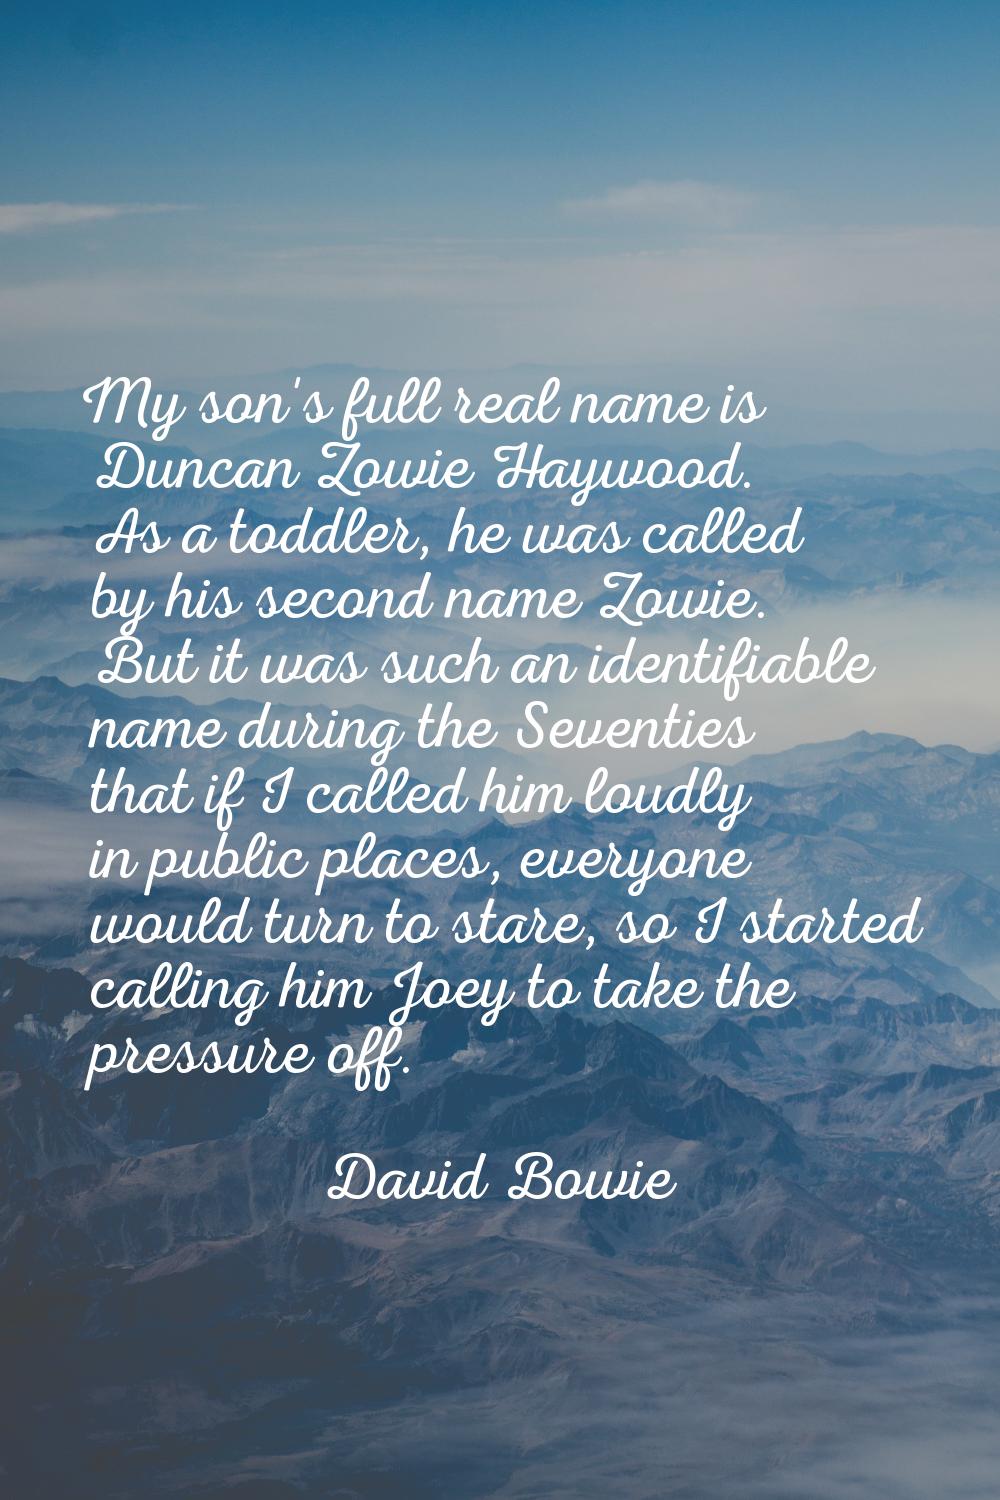 My son's full real name is Duncan Zowie Haywood. As a toddler, he was called by his second name Zow